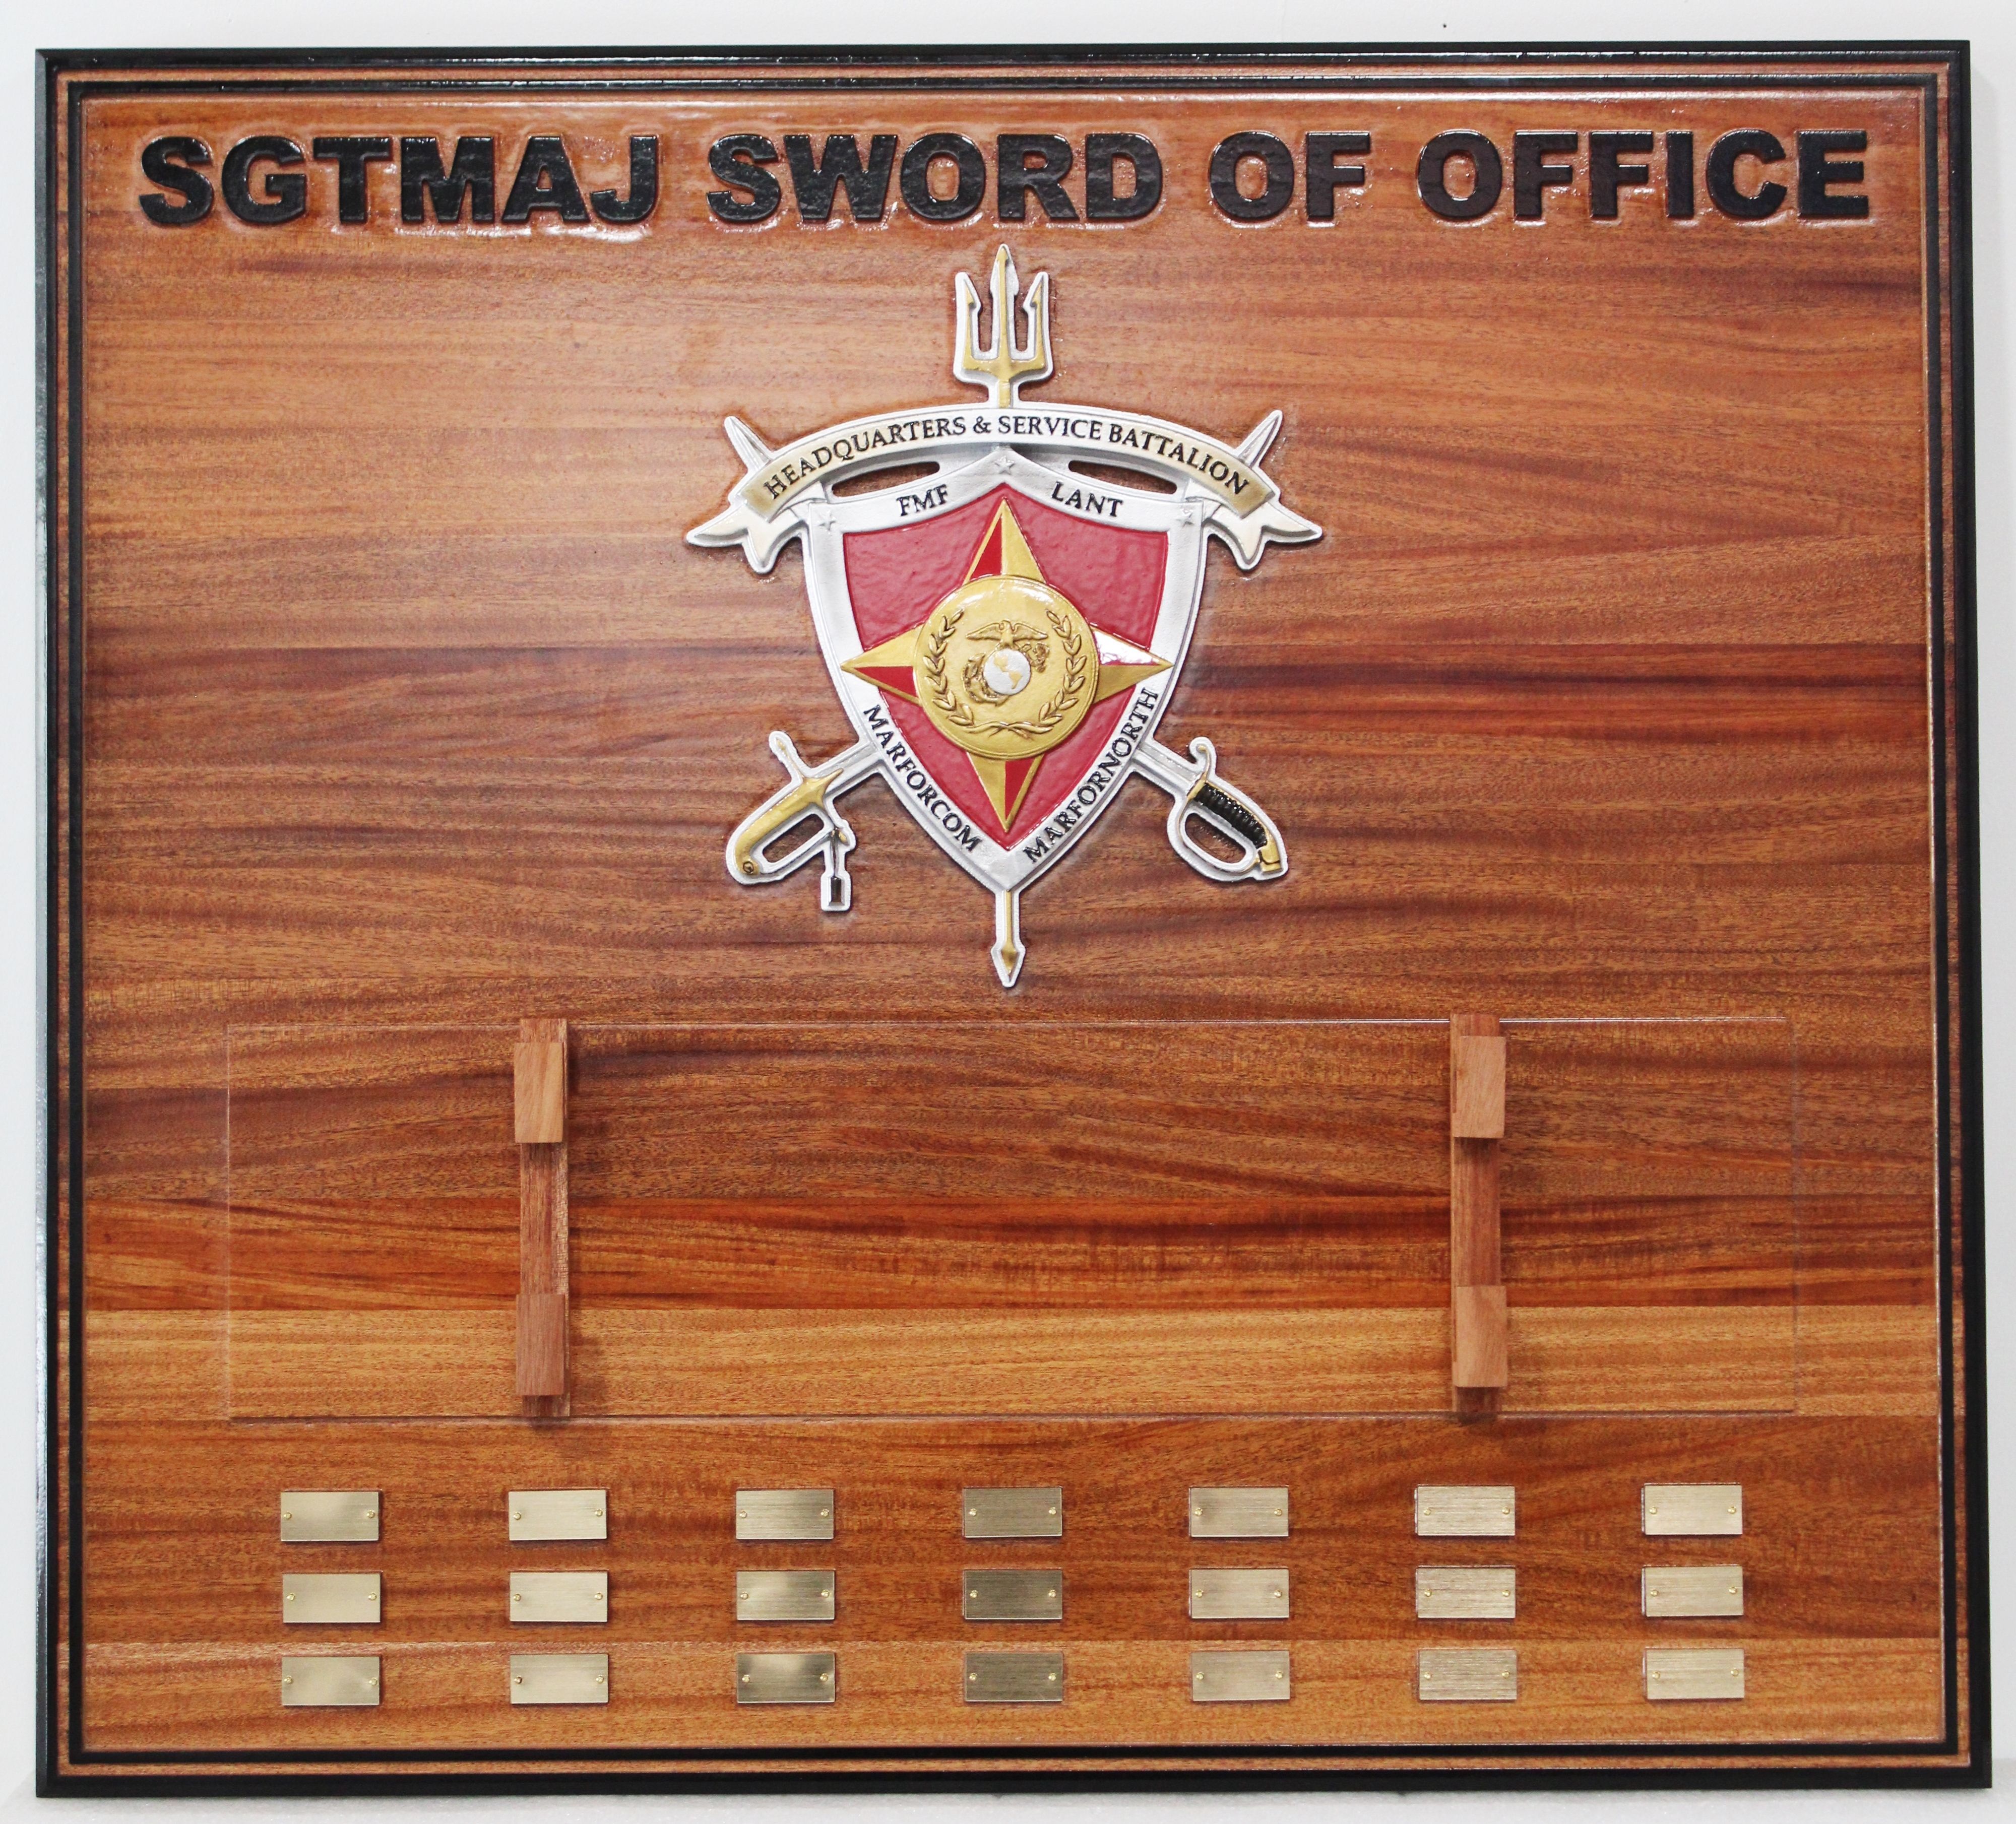 SB1024 - Mahogany Recognition Plaque the US Marine Corps "Sword of Office", Honoring Sergeant Majors of the Headquarters and Service Battalion, MARFORCOM NORTH 